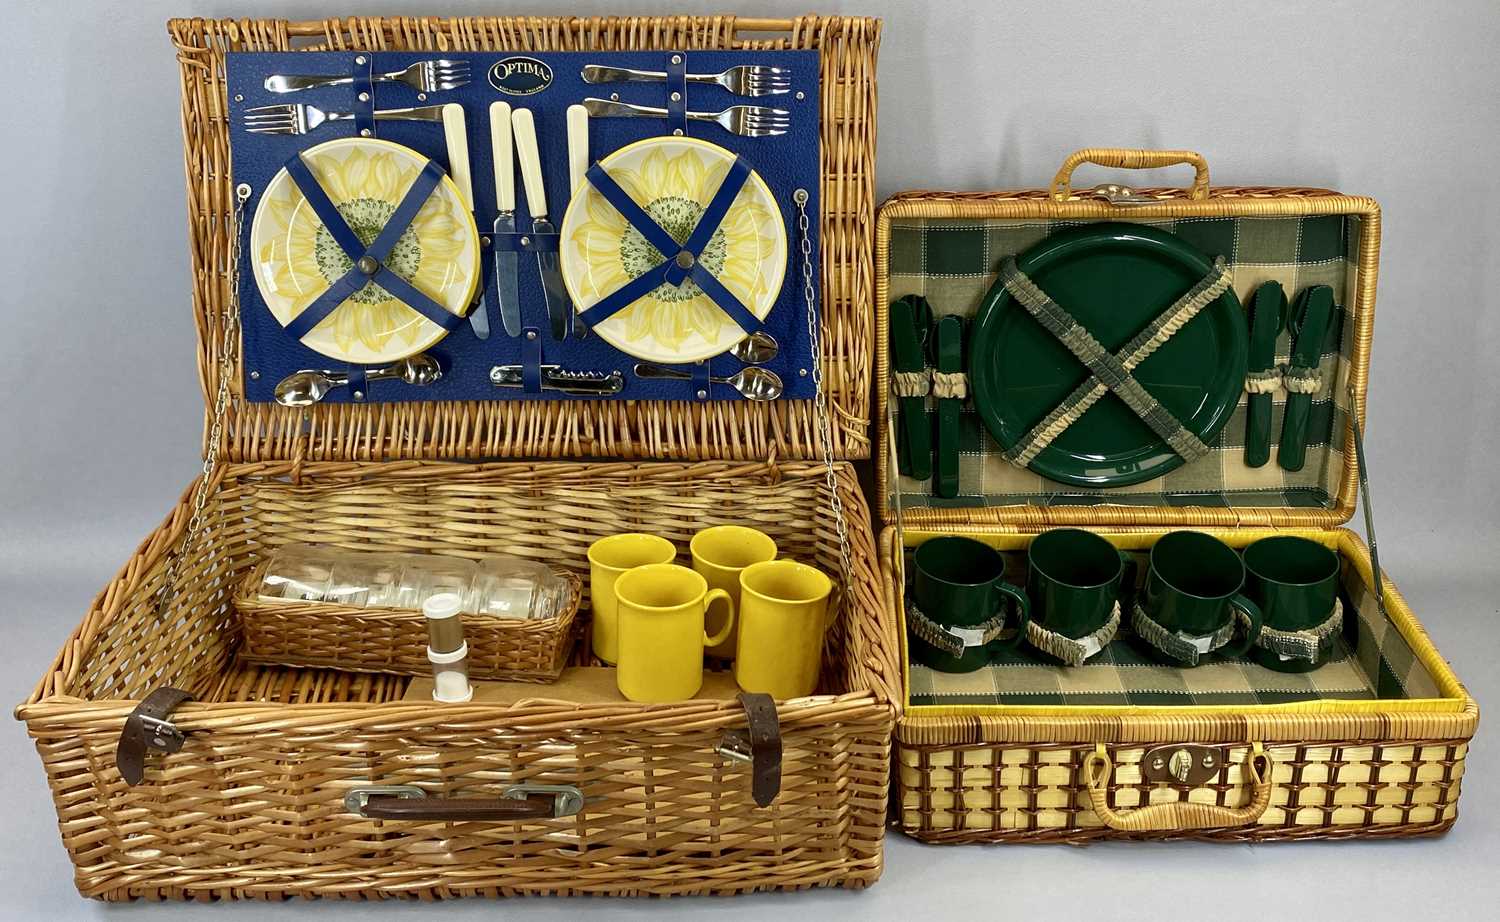 CANE PICNIC HAMPERS (2) - with assorted contents